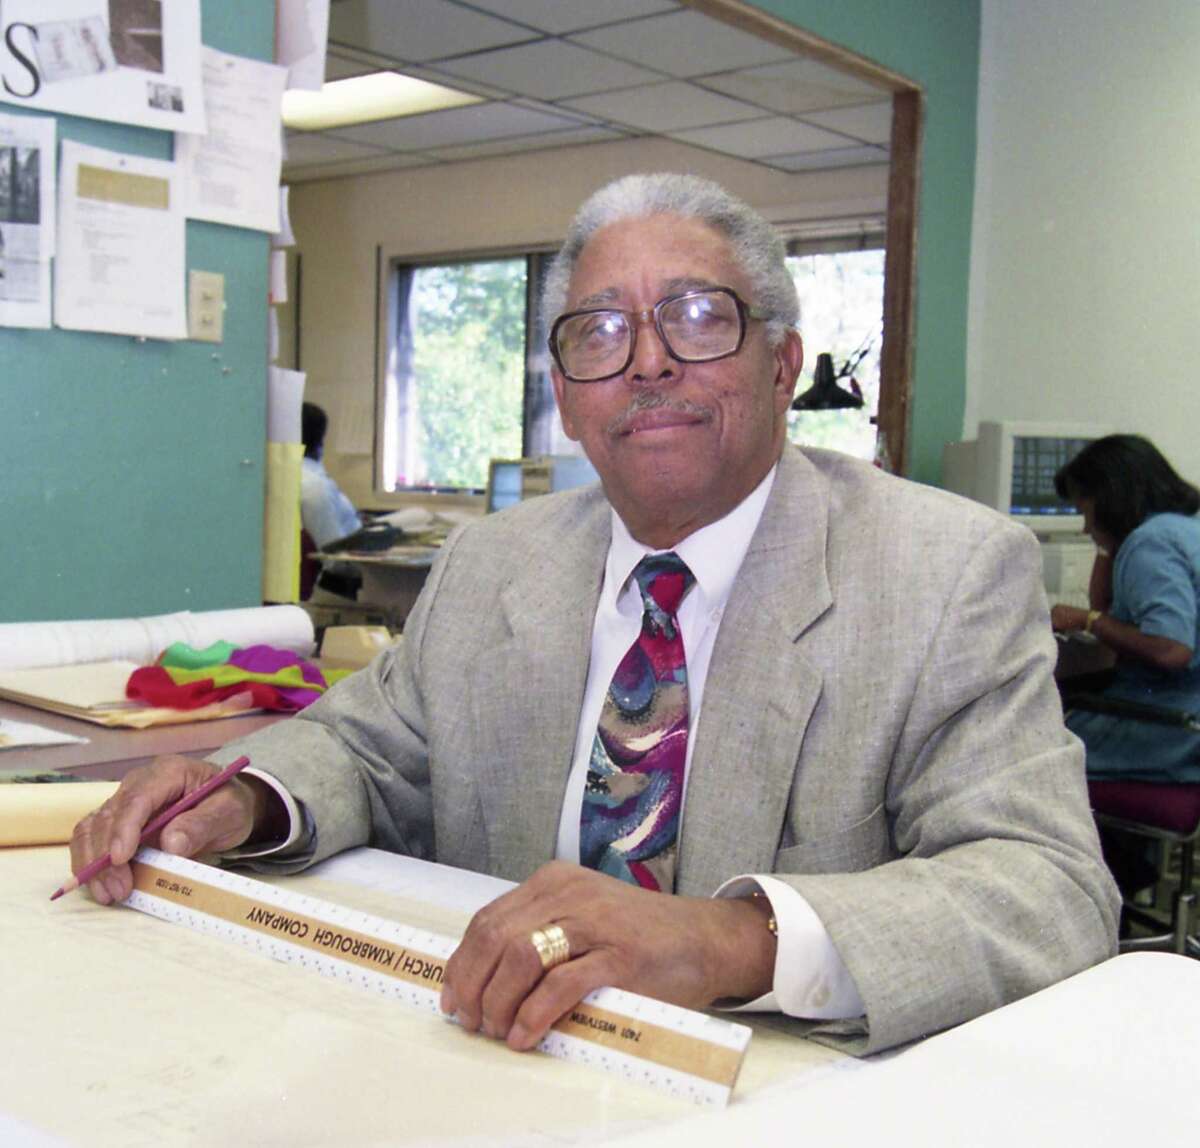 John S. Chase was the first Black licensed architect in Texas. Chase died in 2012. His son, Tony Chase is donating $1 million to the University of Texas School of Architecture to create two endowments.